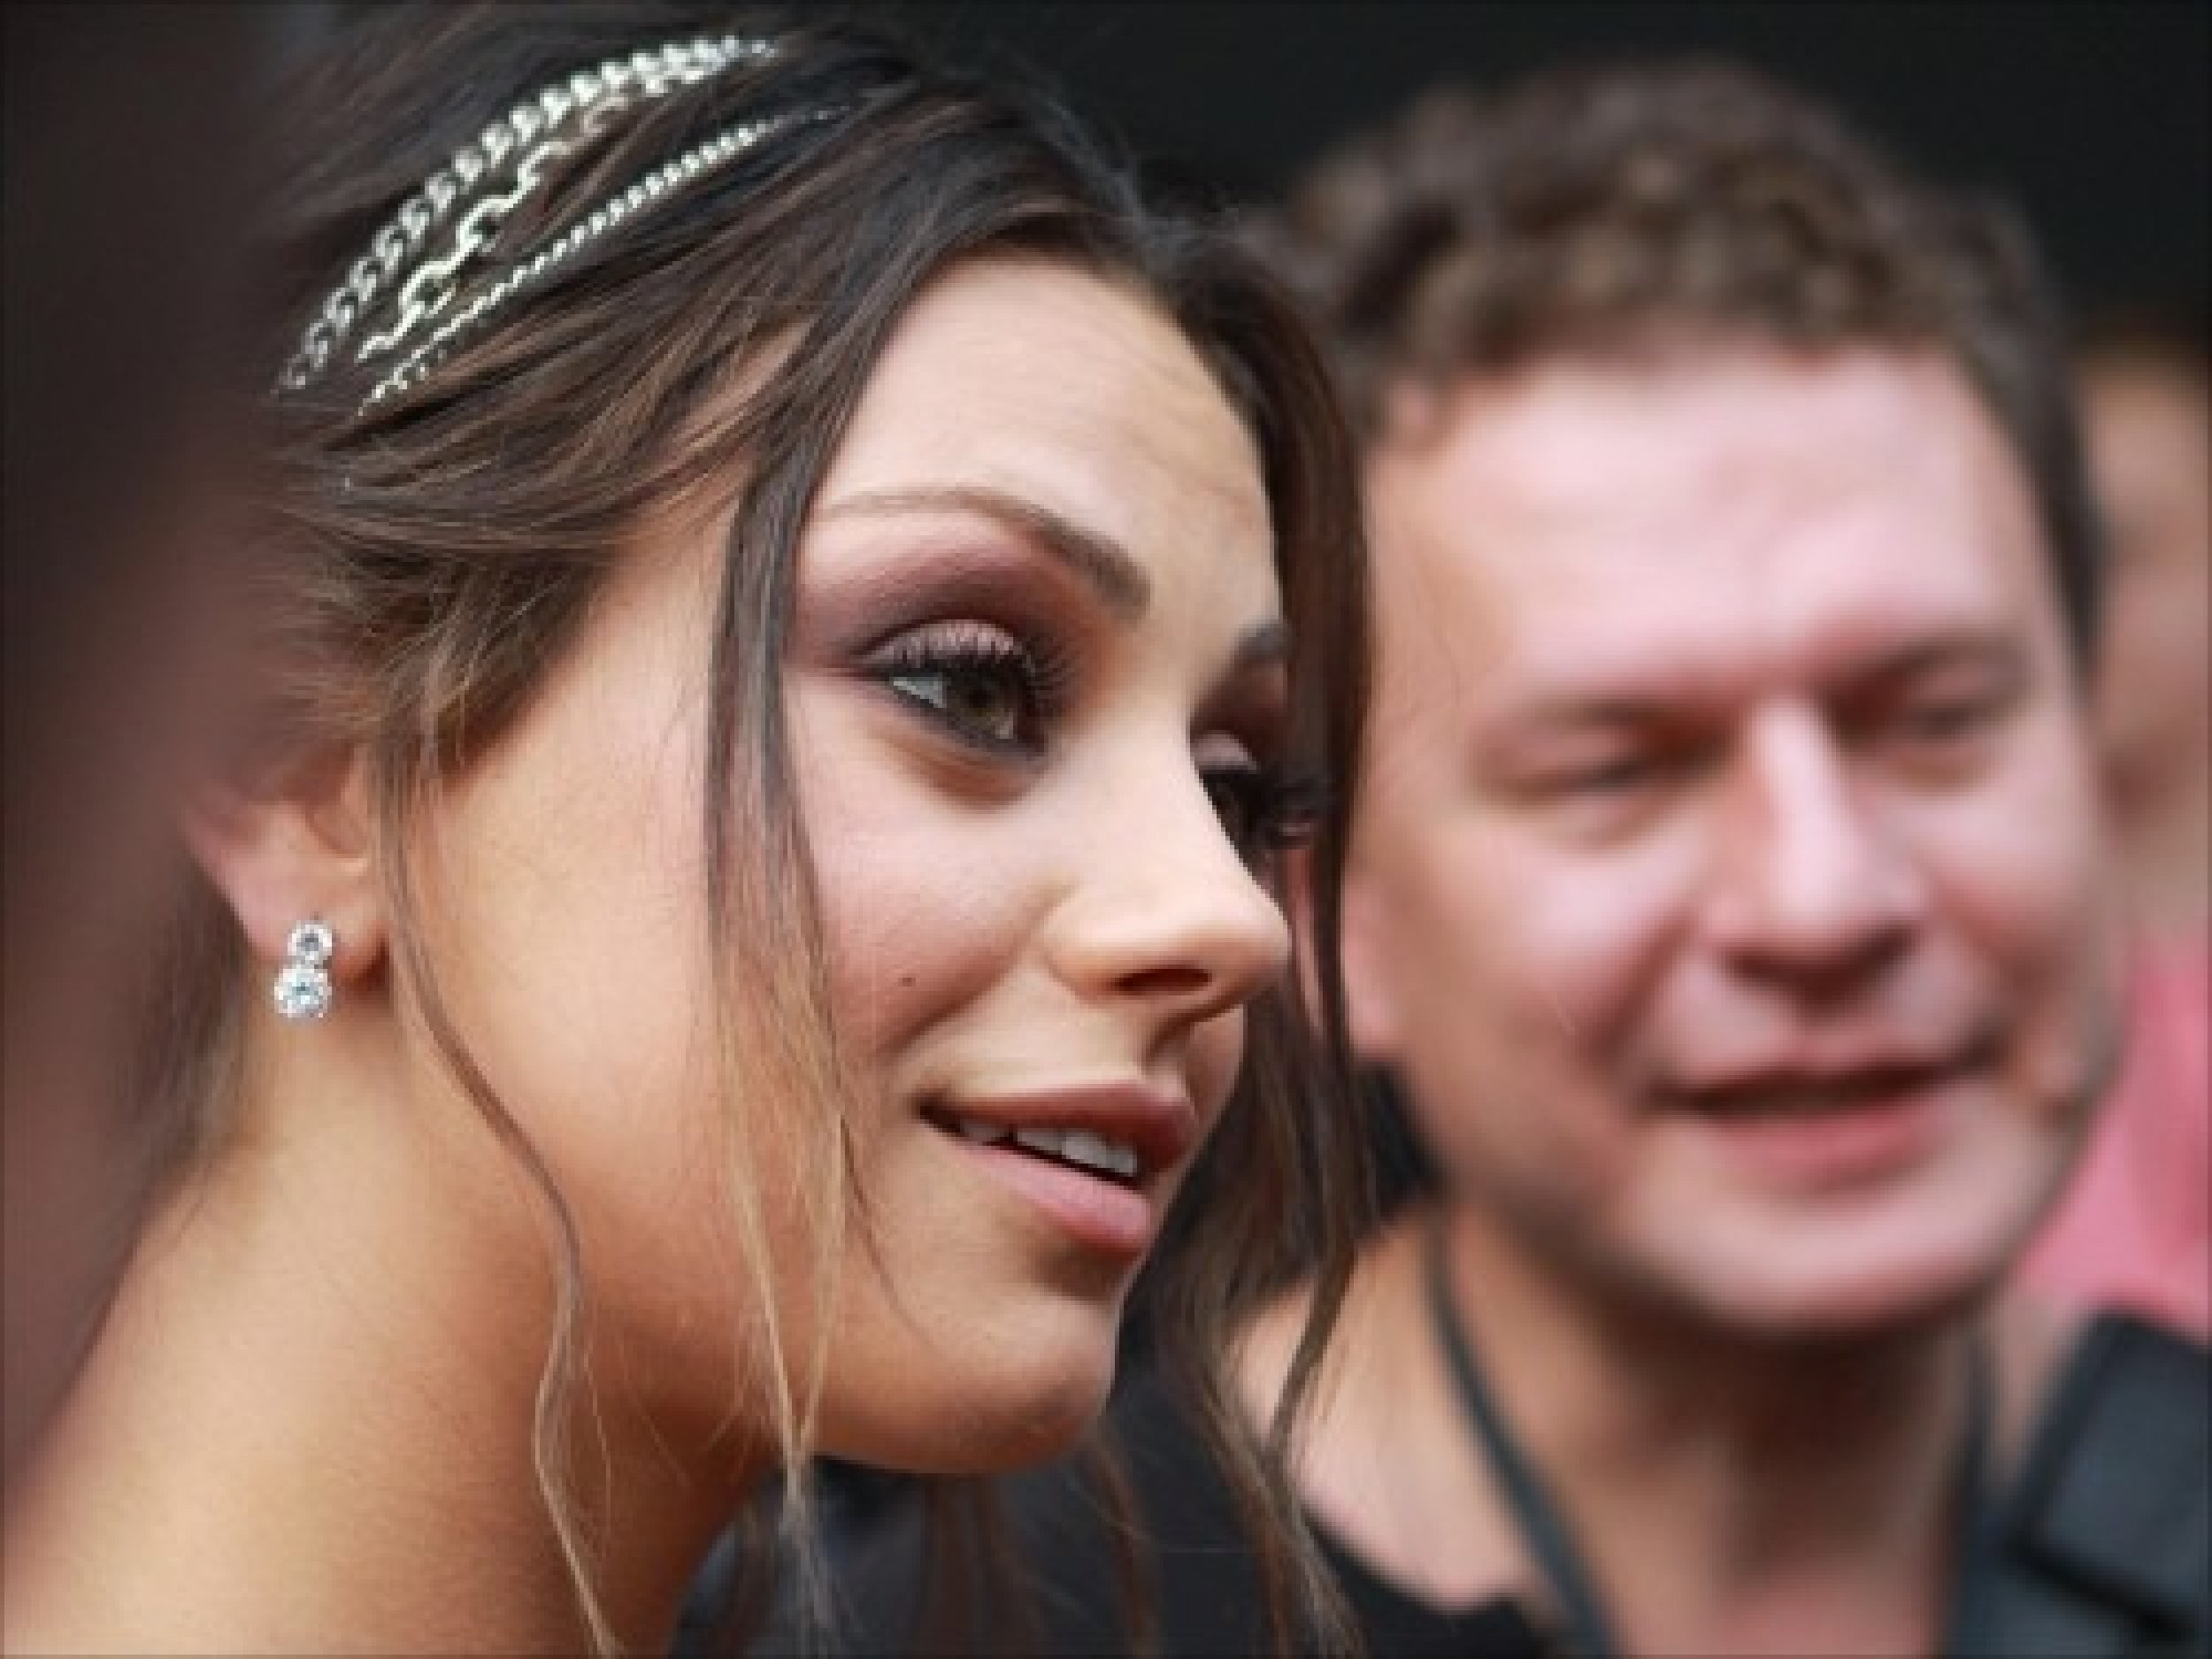 Moscow premiere of Friends with Benefits